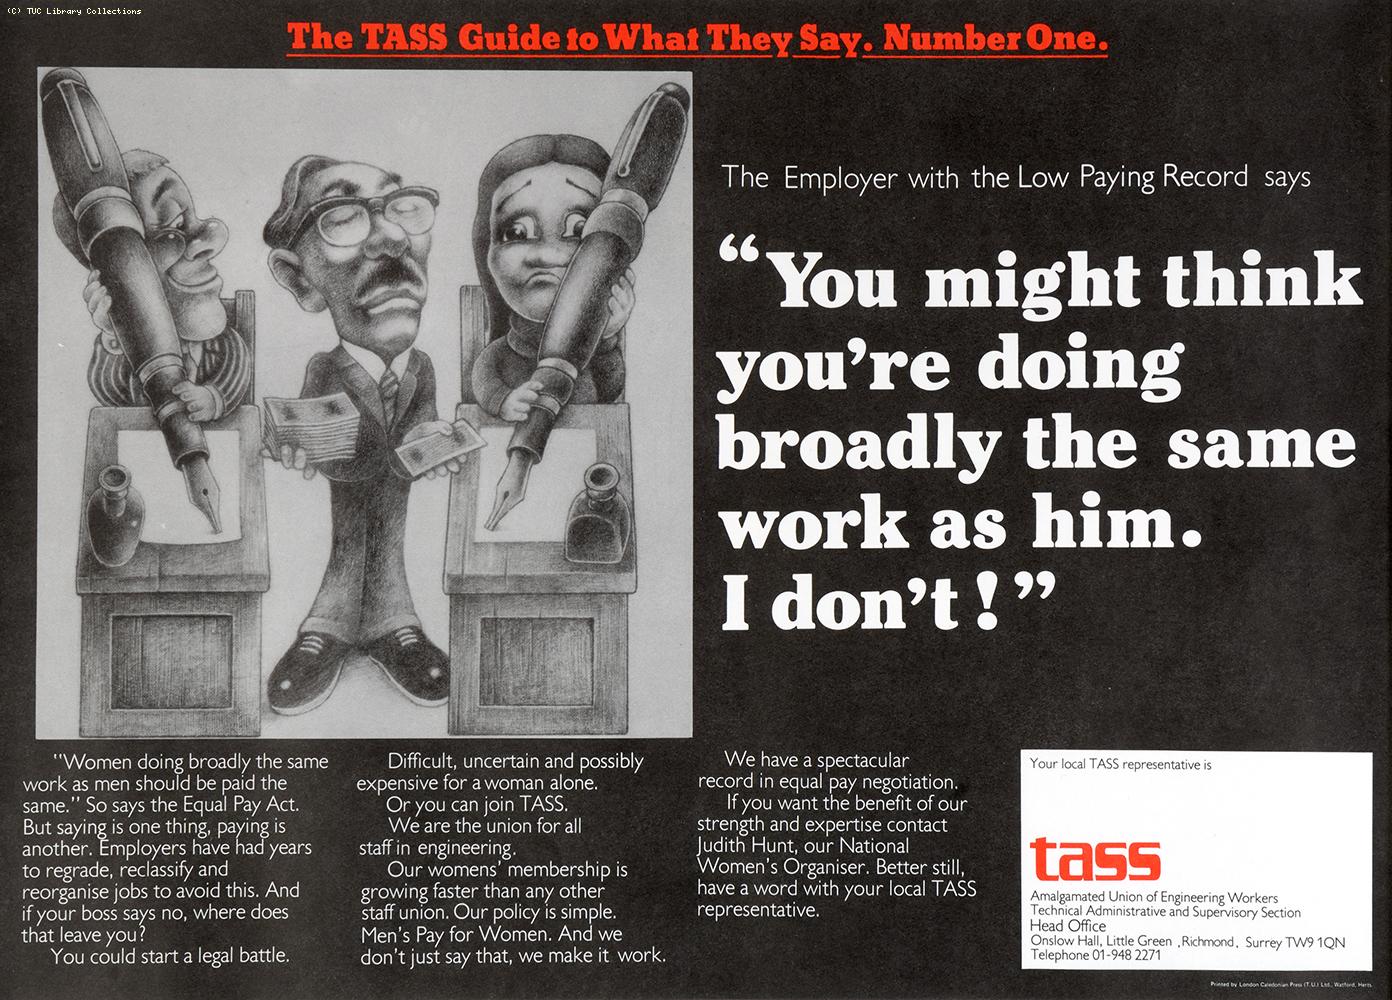 The TASS guide to what they say - poster 1, c 1976